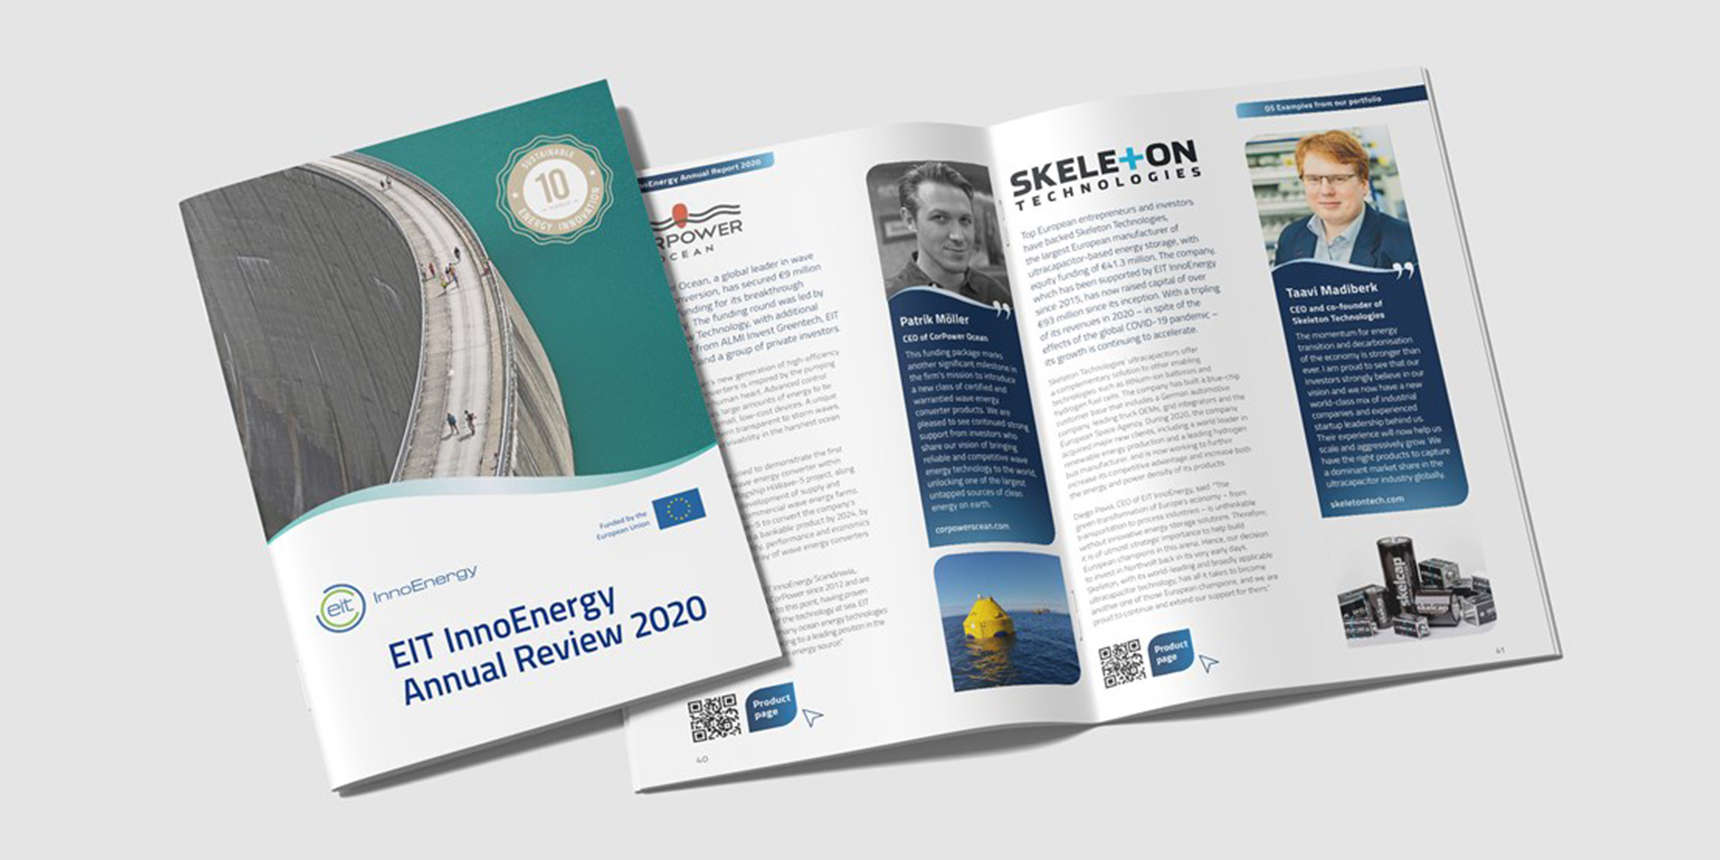 EIT InnoEnergy Annual Review 2020 published